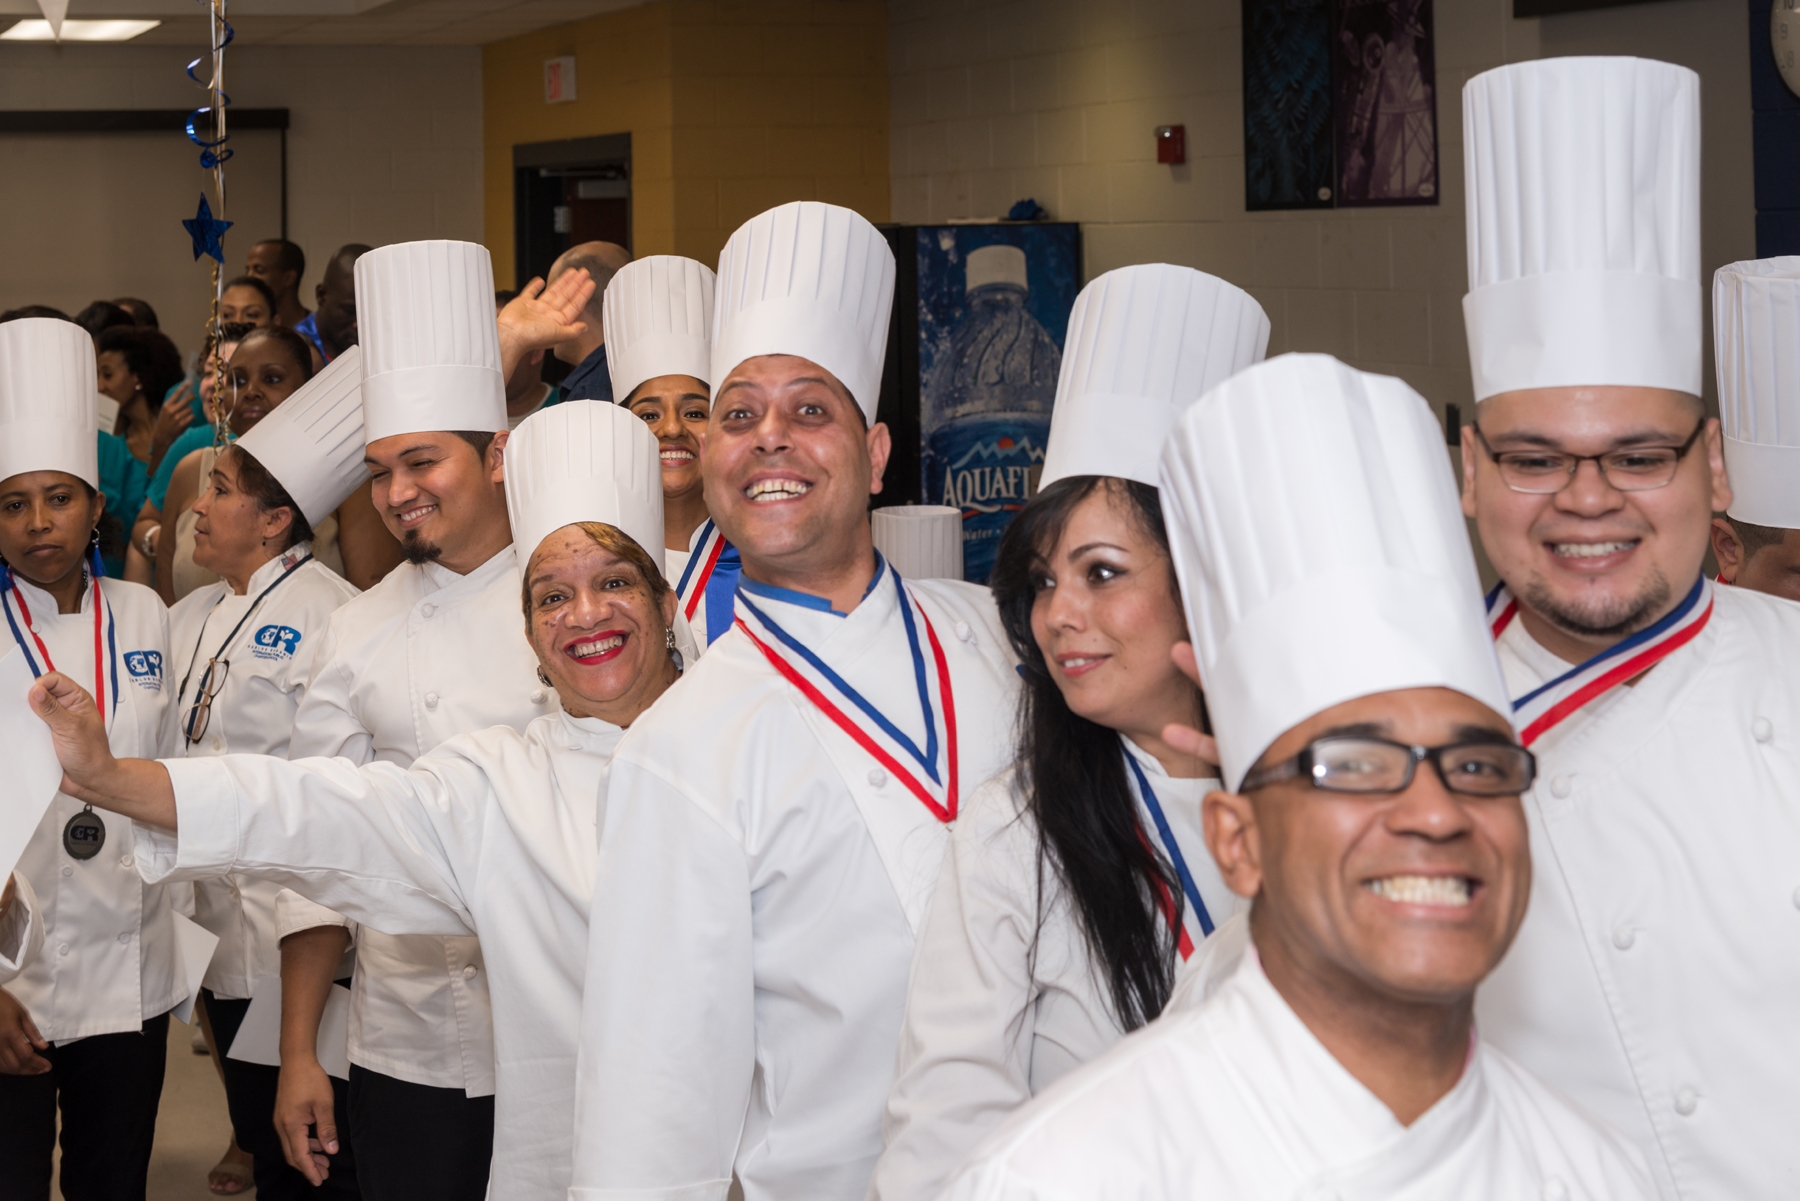 Culinary arts graduates celebrate together at the 2016 graduation ceremony. The Carlos Rosario School offers a culinary arts career training program that prepares students to enter into and excel in food service careers. 